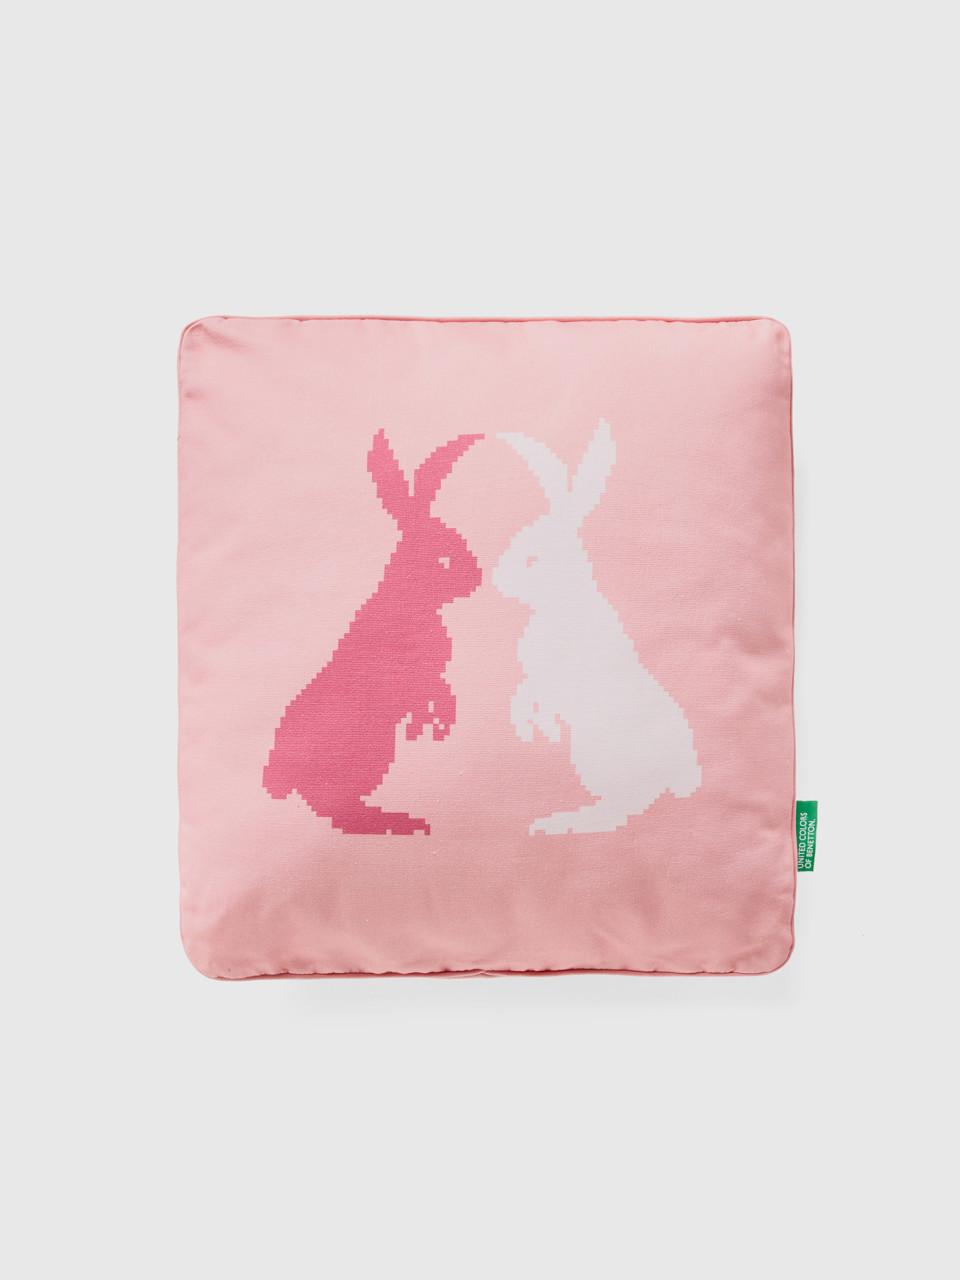 Benetton, Square Pillow With Bunnies, Pink, Benetton Home